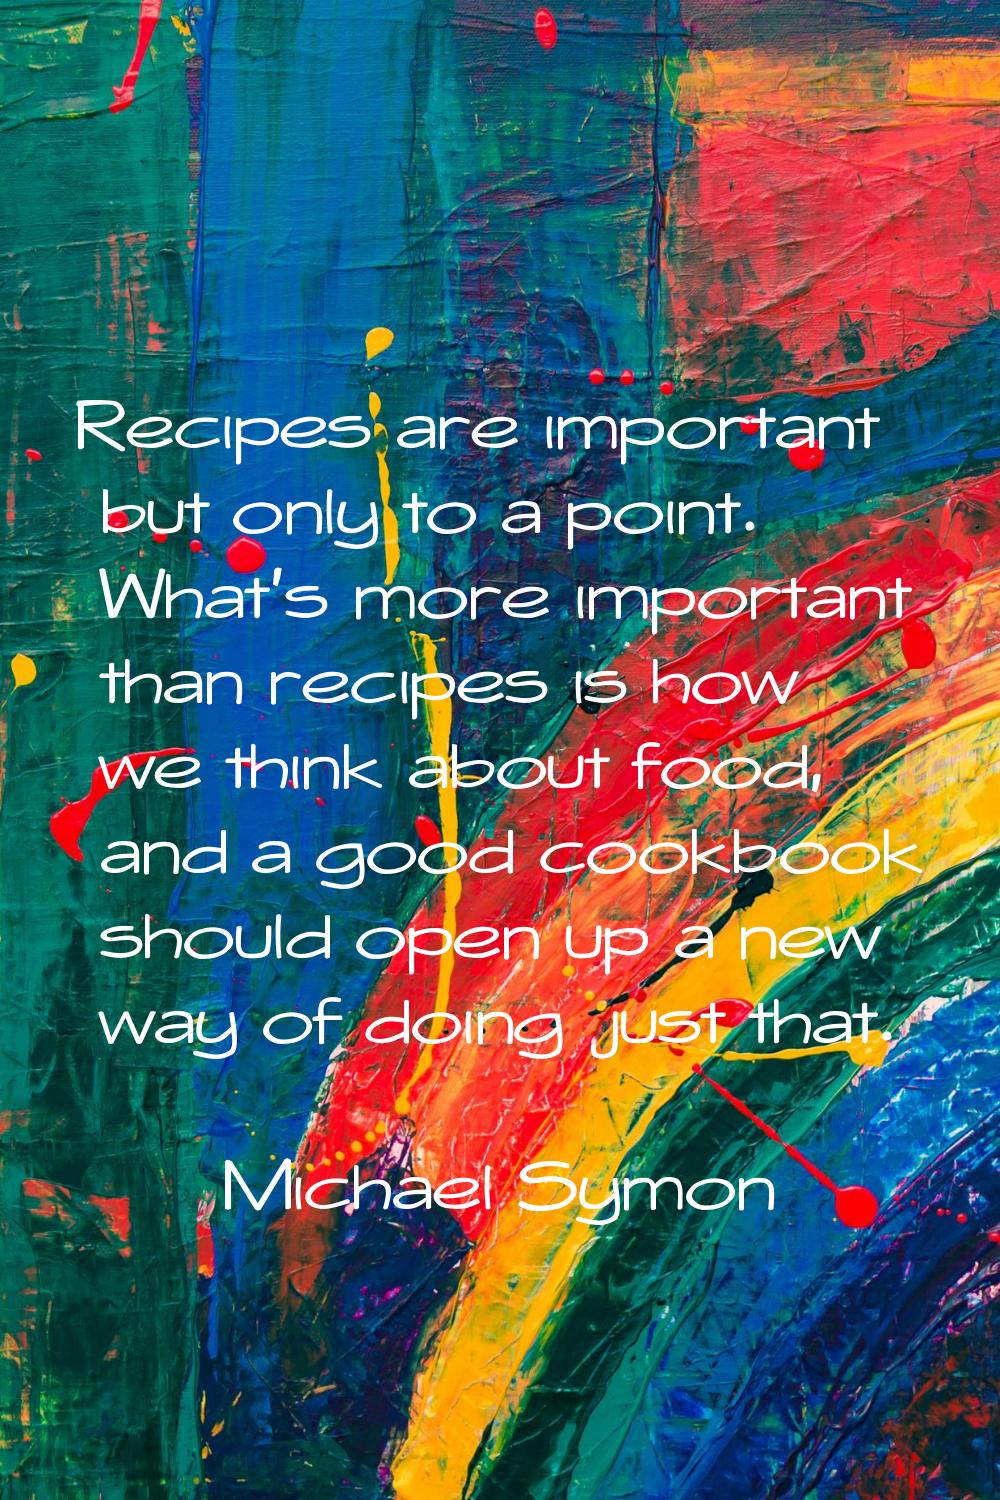 Recipes are important but only to a point. What's more important than recipes is how we think about